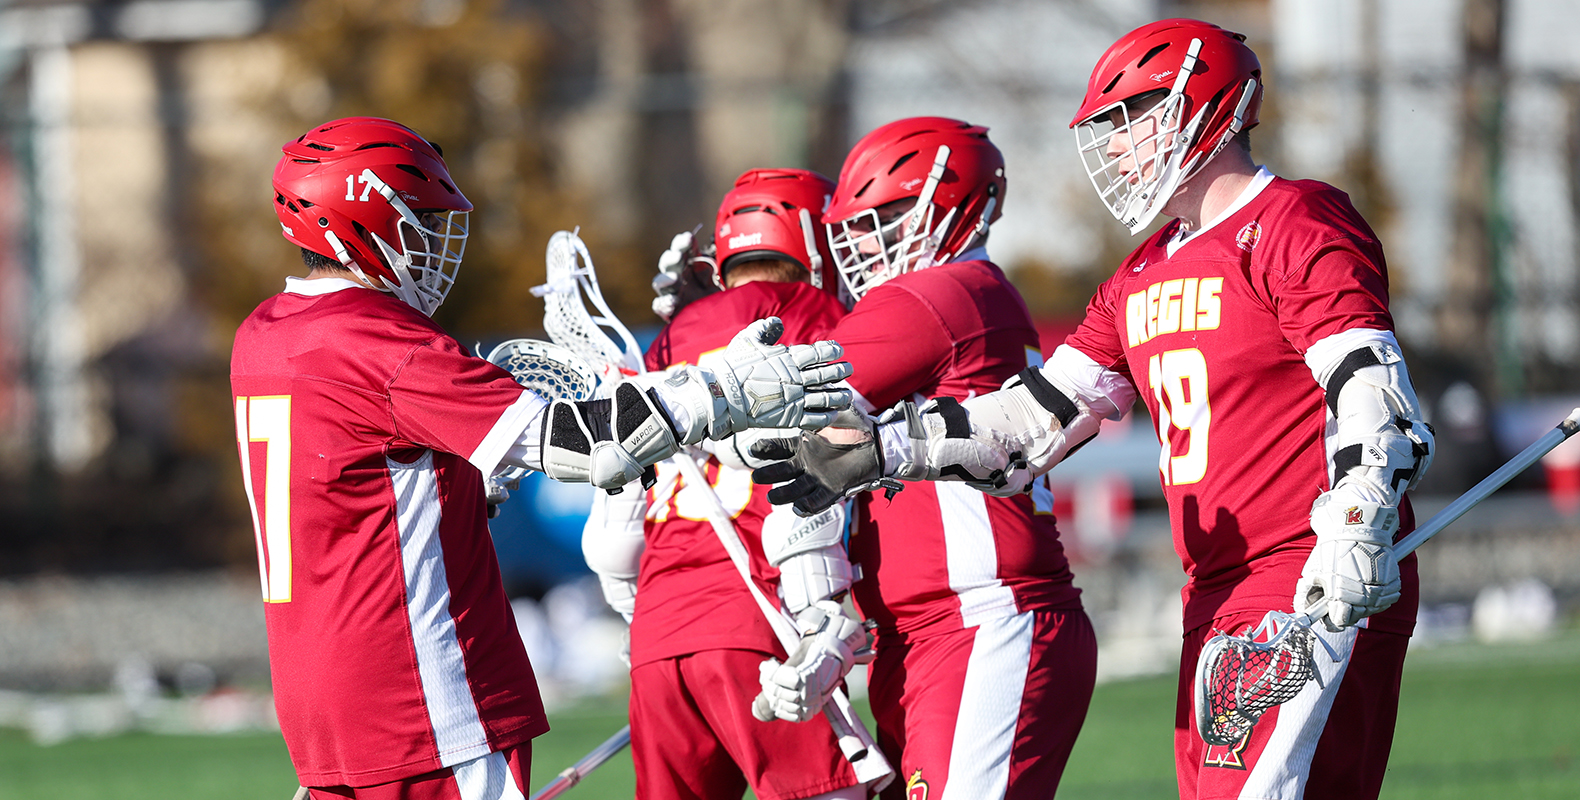 Regis Men’s Lacrosse Improves to 2-0 with Road Victory